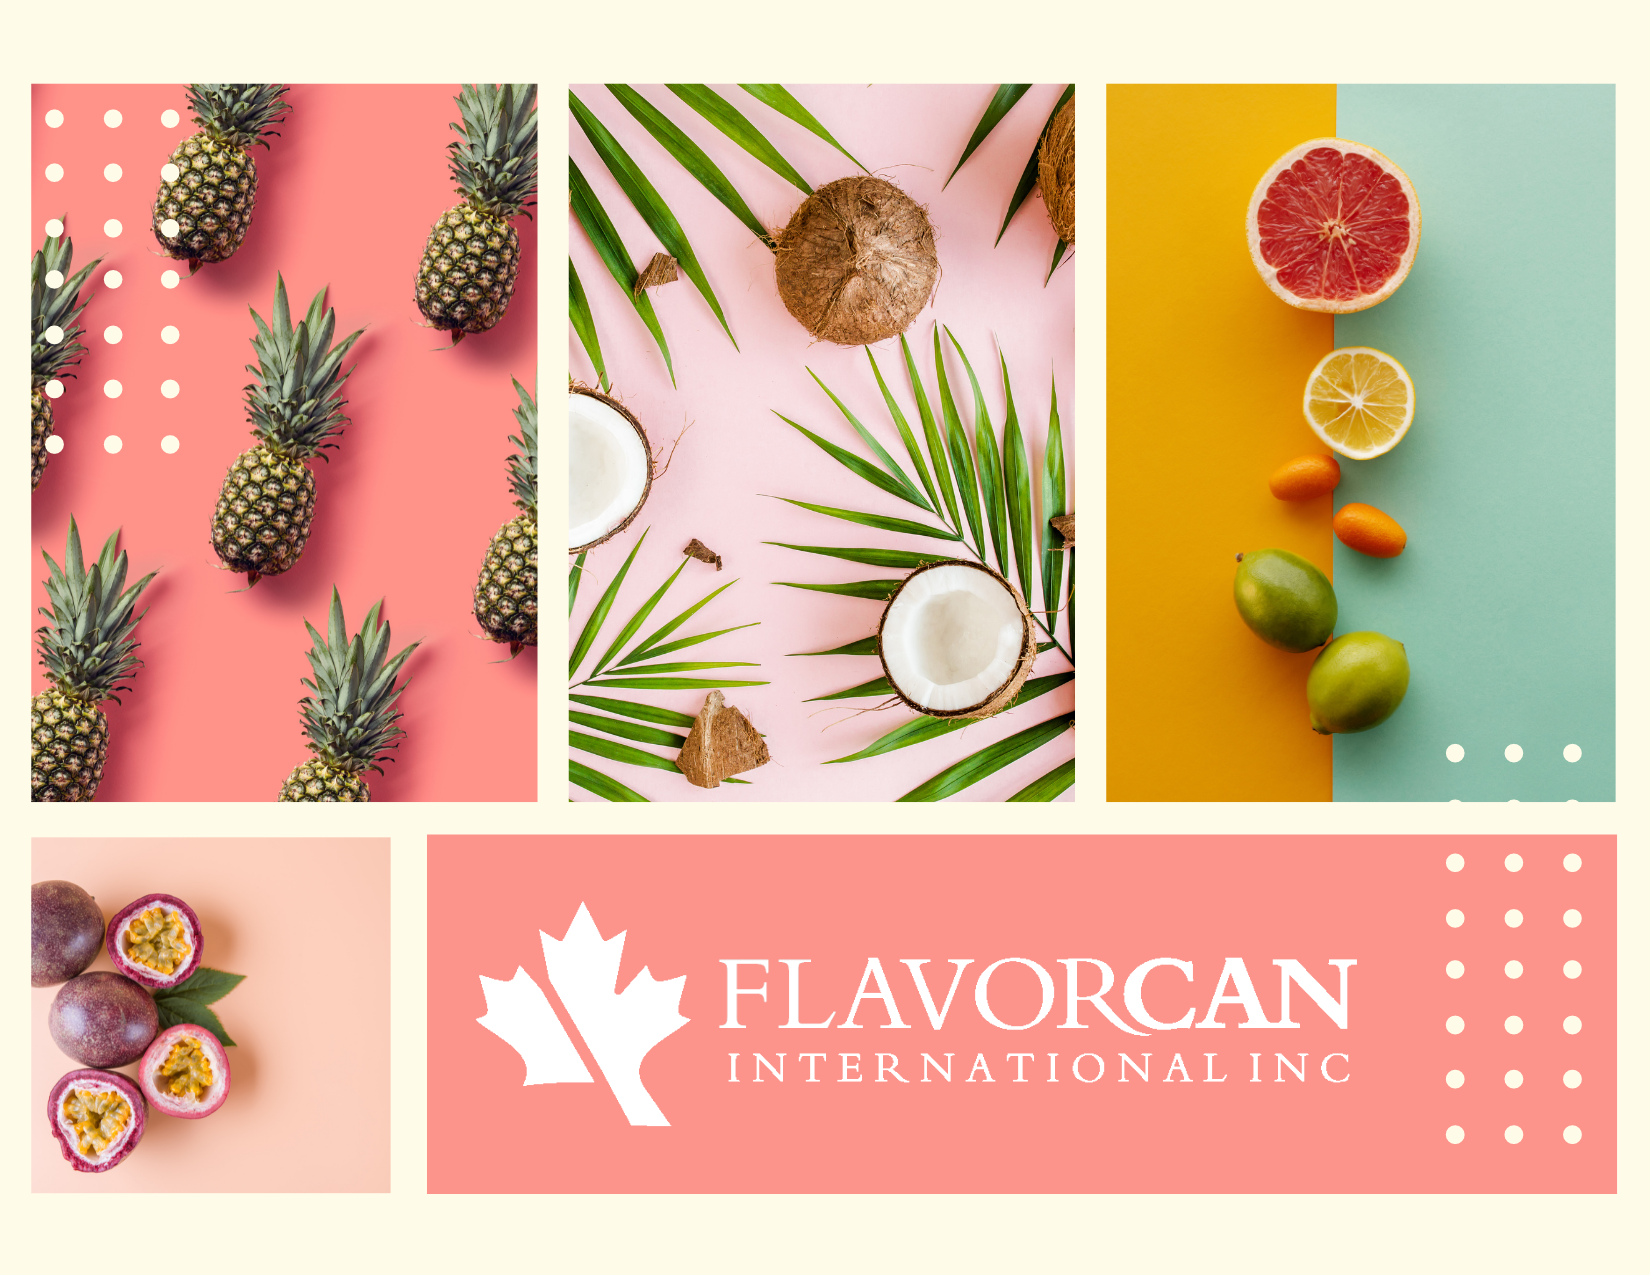 Escape the winter with Flavorcan’s tropical flavors!